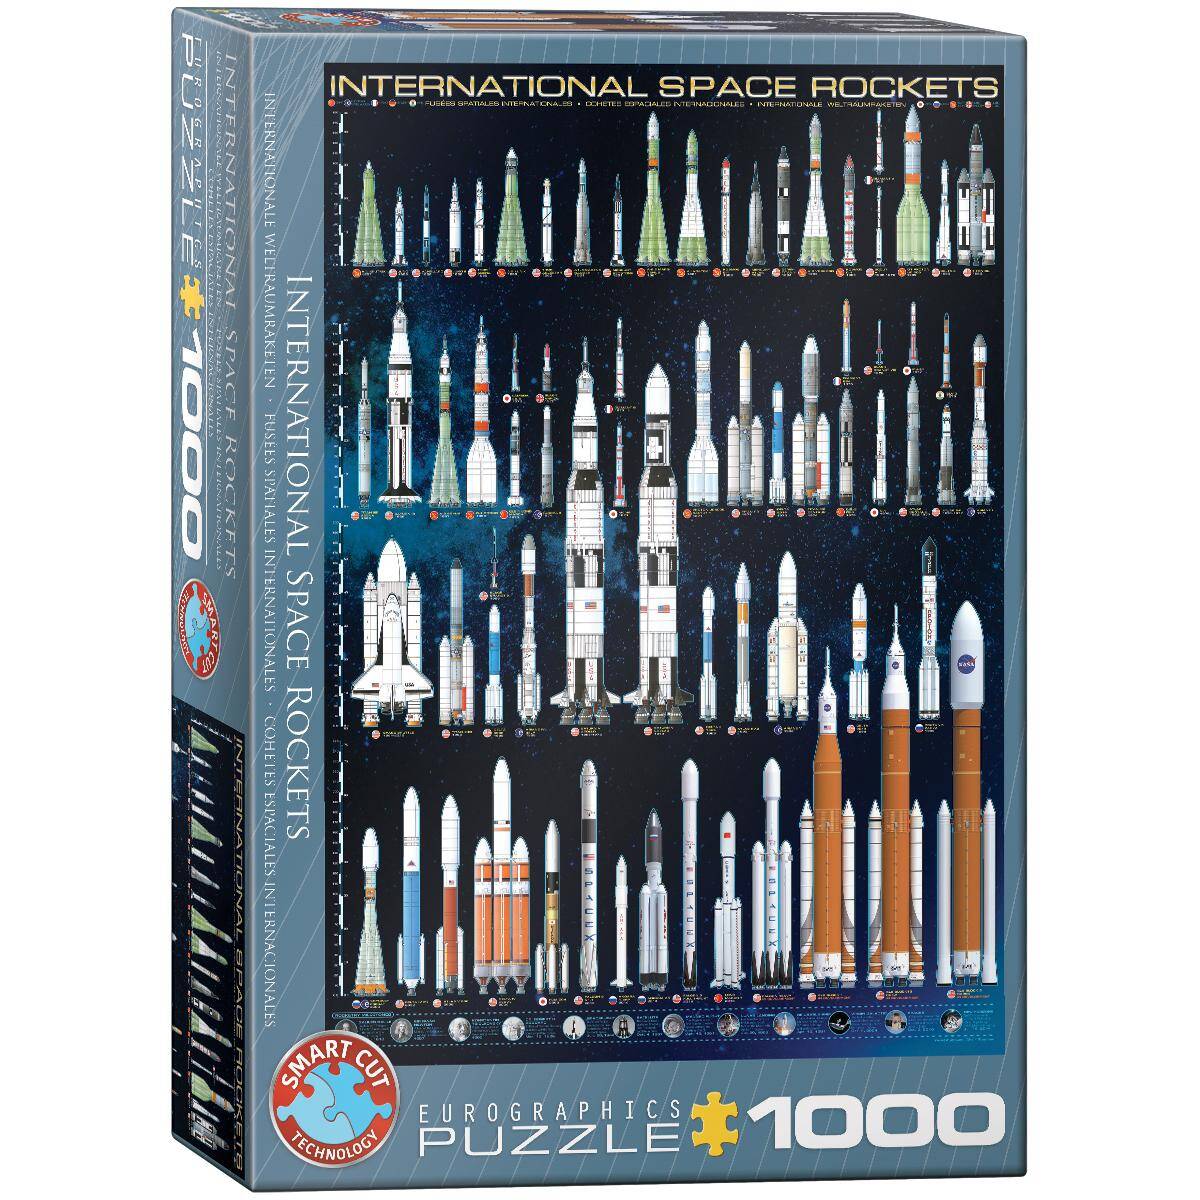 Puzzle 1000 International Space Rockets 6000-1015